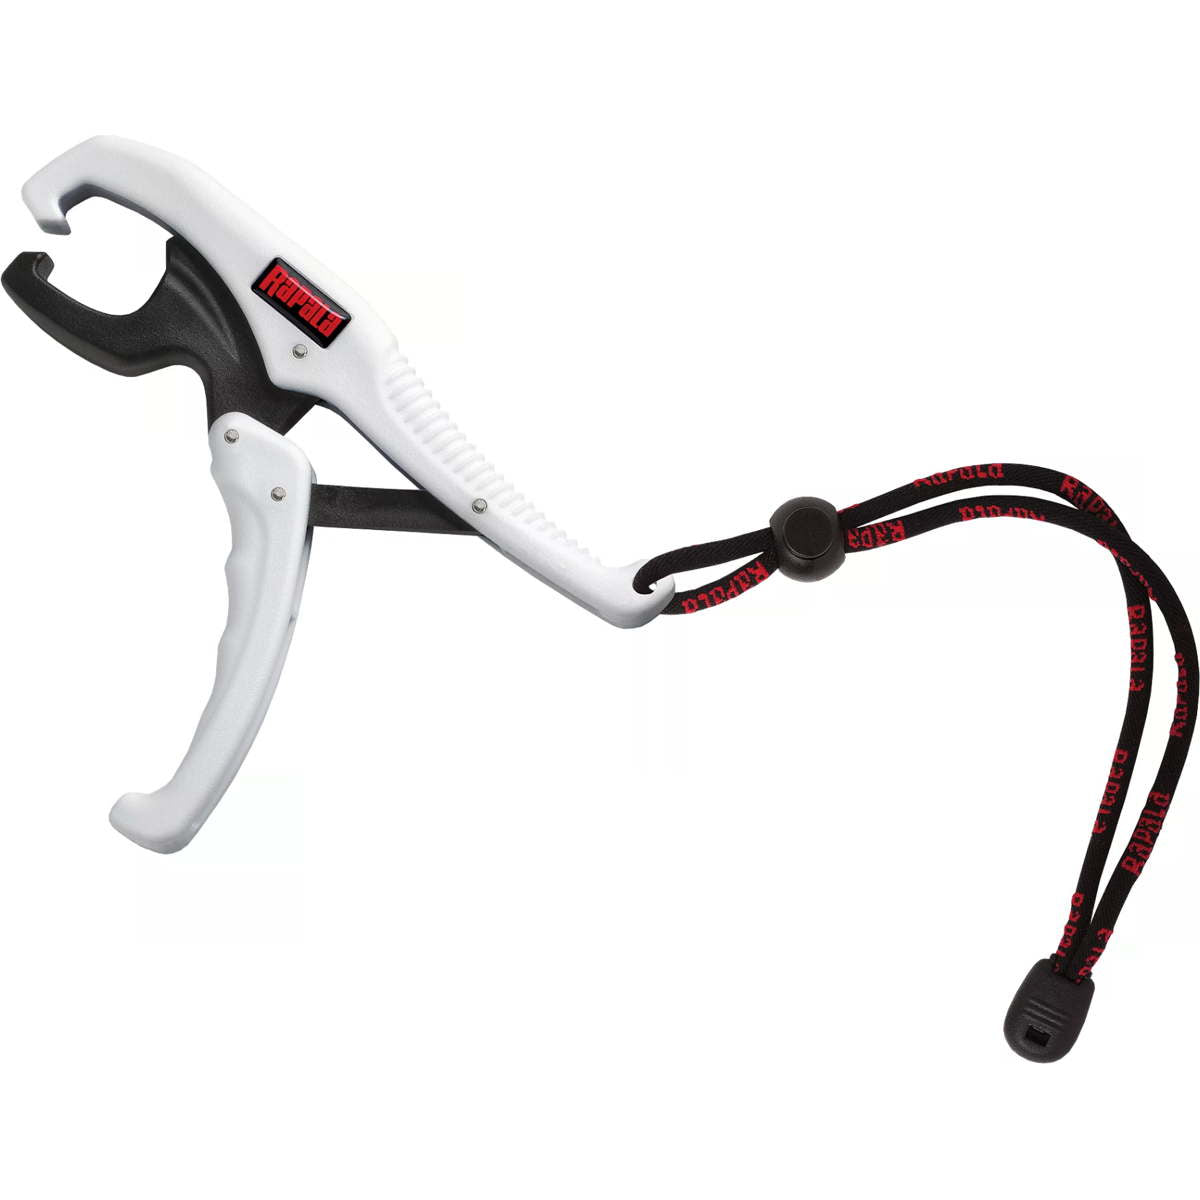 Photo of Rapala Floating Fish Gripper for sale at United Tackle Shops.